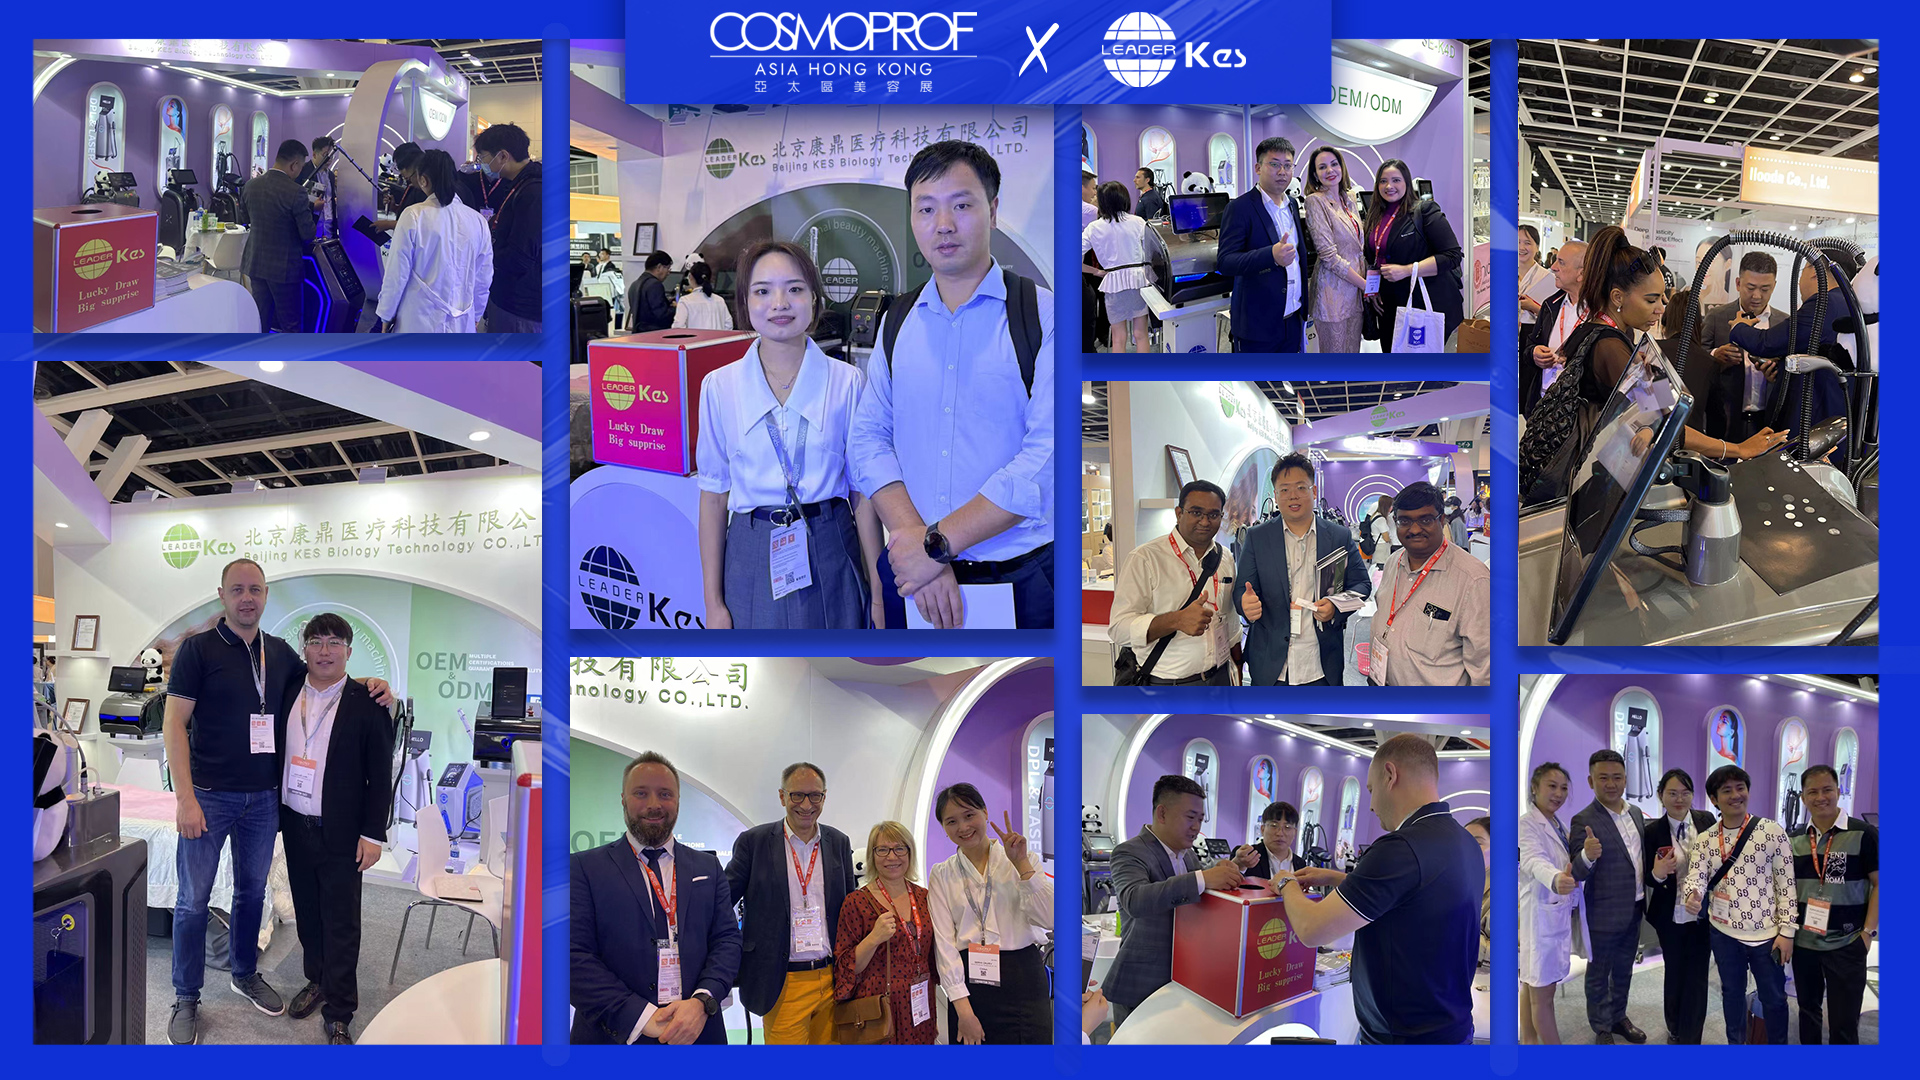 Welcome to KES booth one of the must-visit booths at the 2023 Asia Pacific Cosmoprof Hong Kong